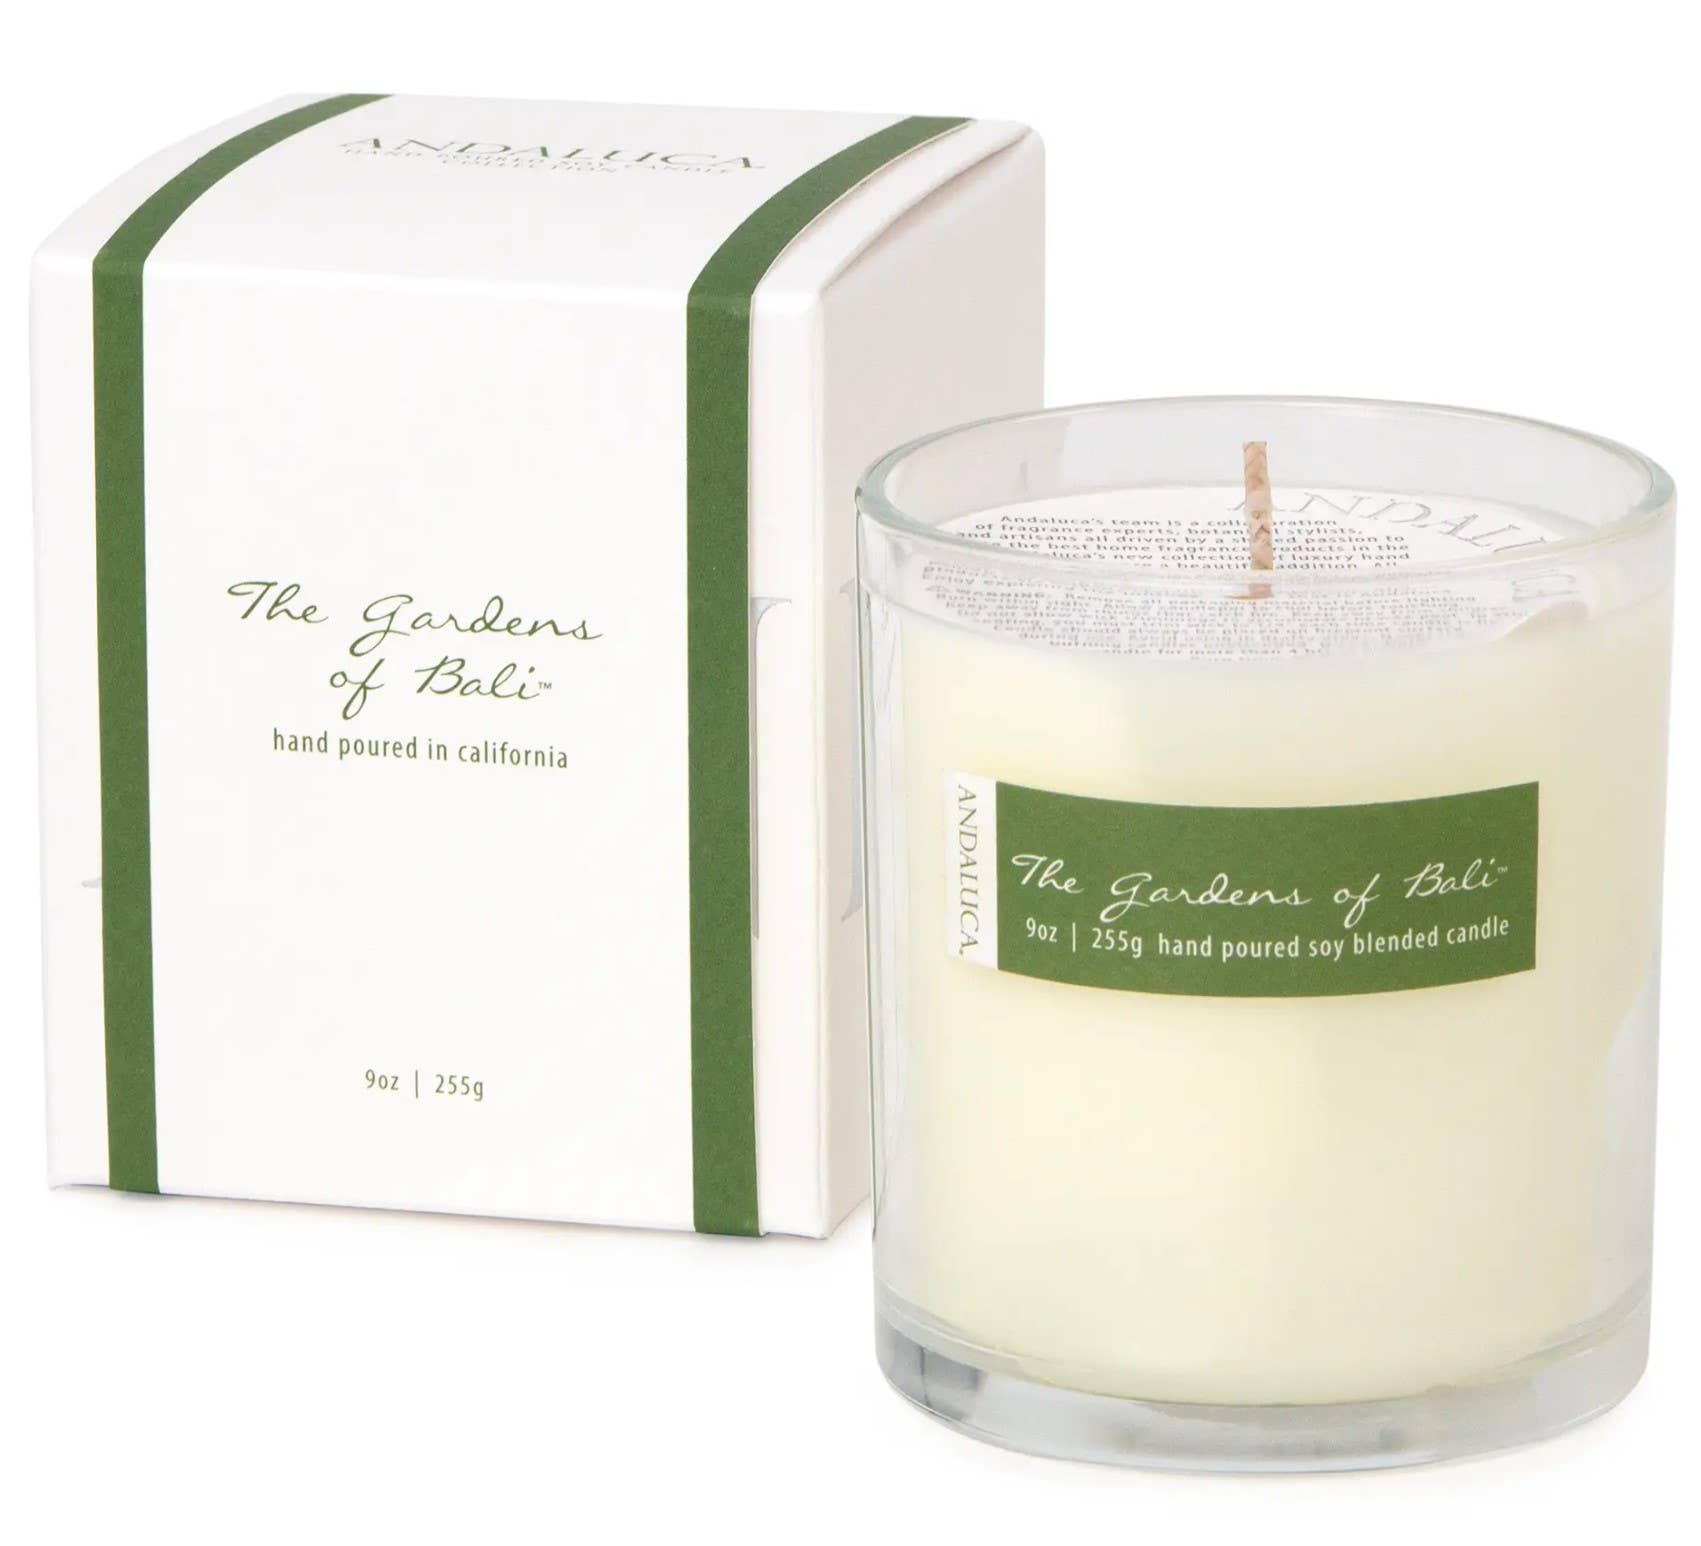 Sample Candle: Lemon Zest and thyme